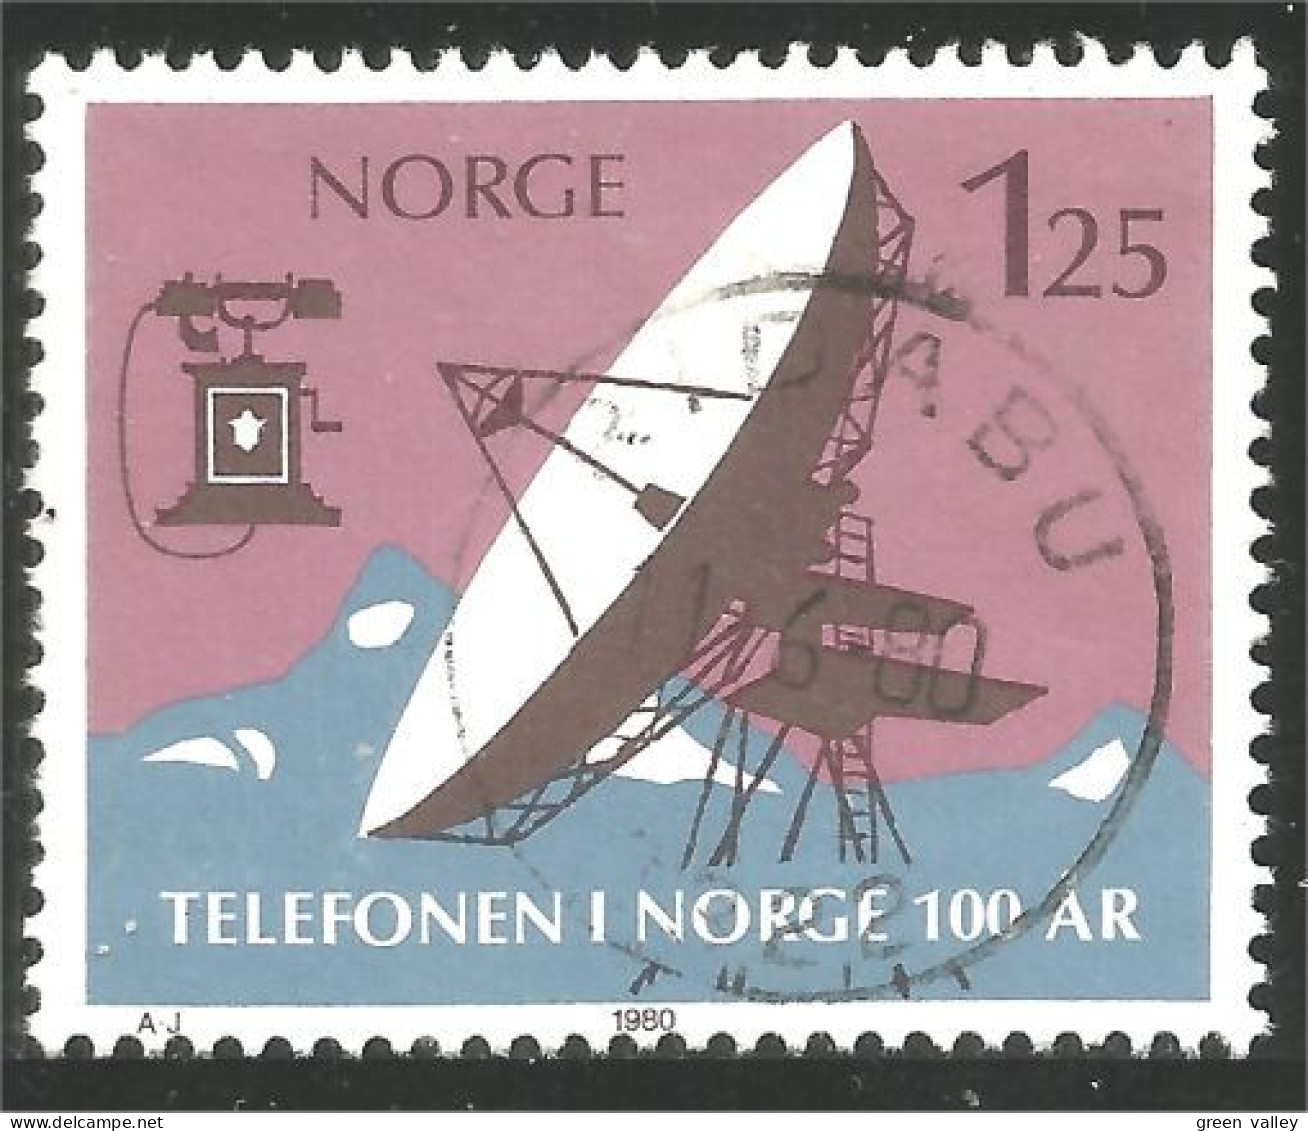 690 Norway Dish Antenna Antenne Telephone Telecommuncations (NOR-334d) - Used Stamps